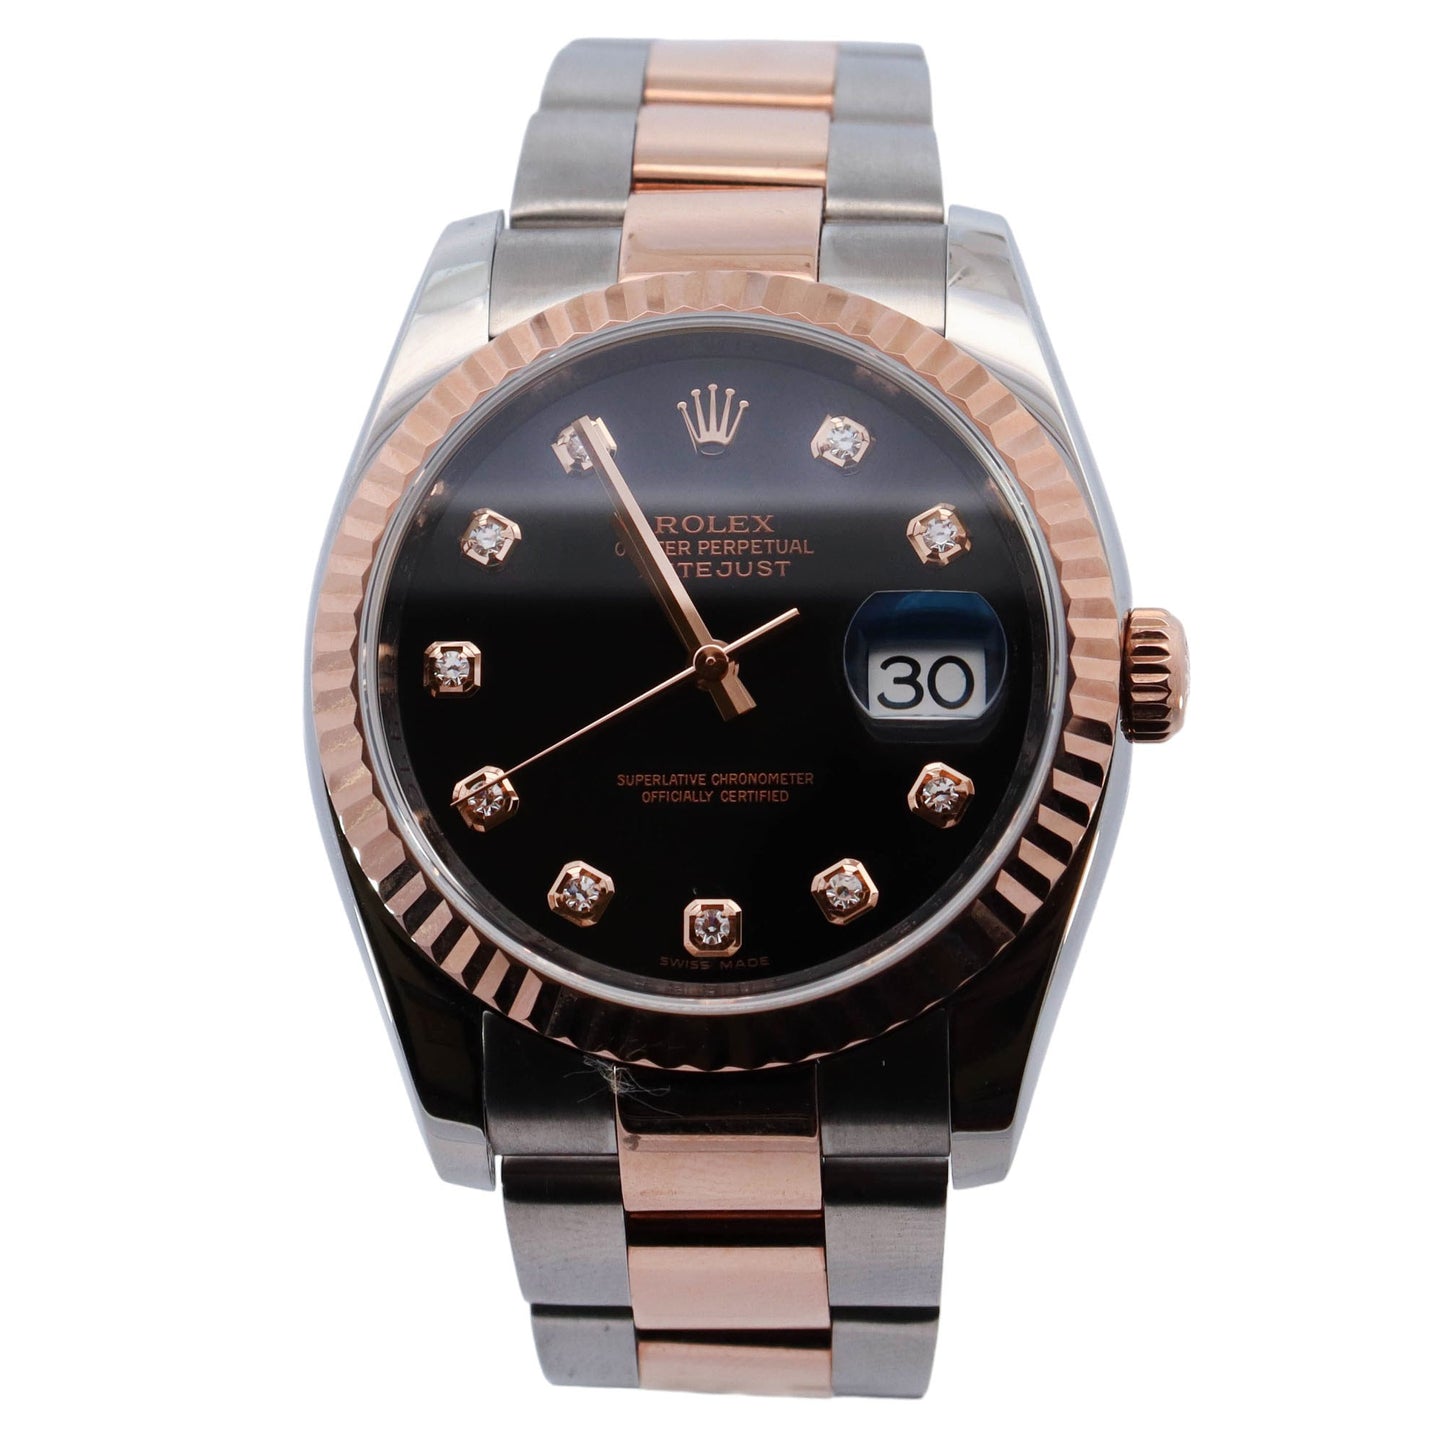 Rolex Datejust Two Tone Rose Gold & Steel 36 Black Diamond Dial Watch Reference# 116231